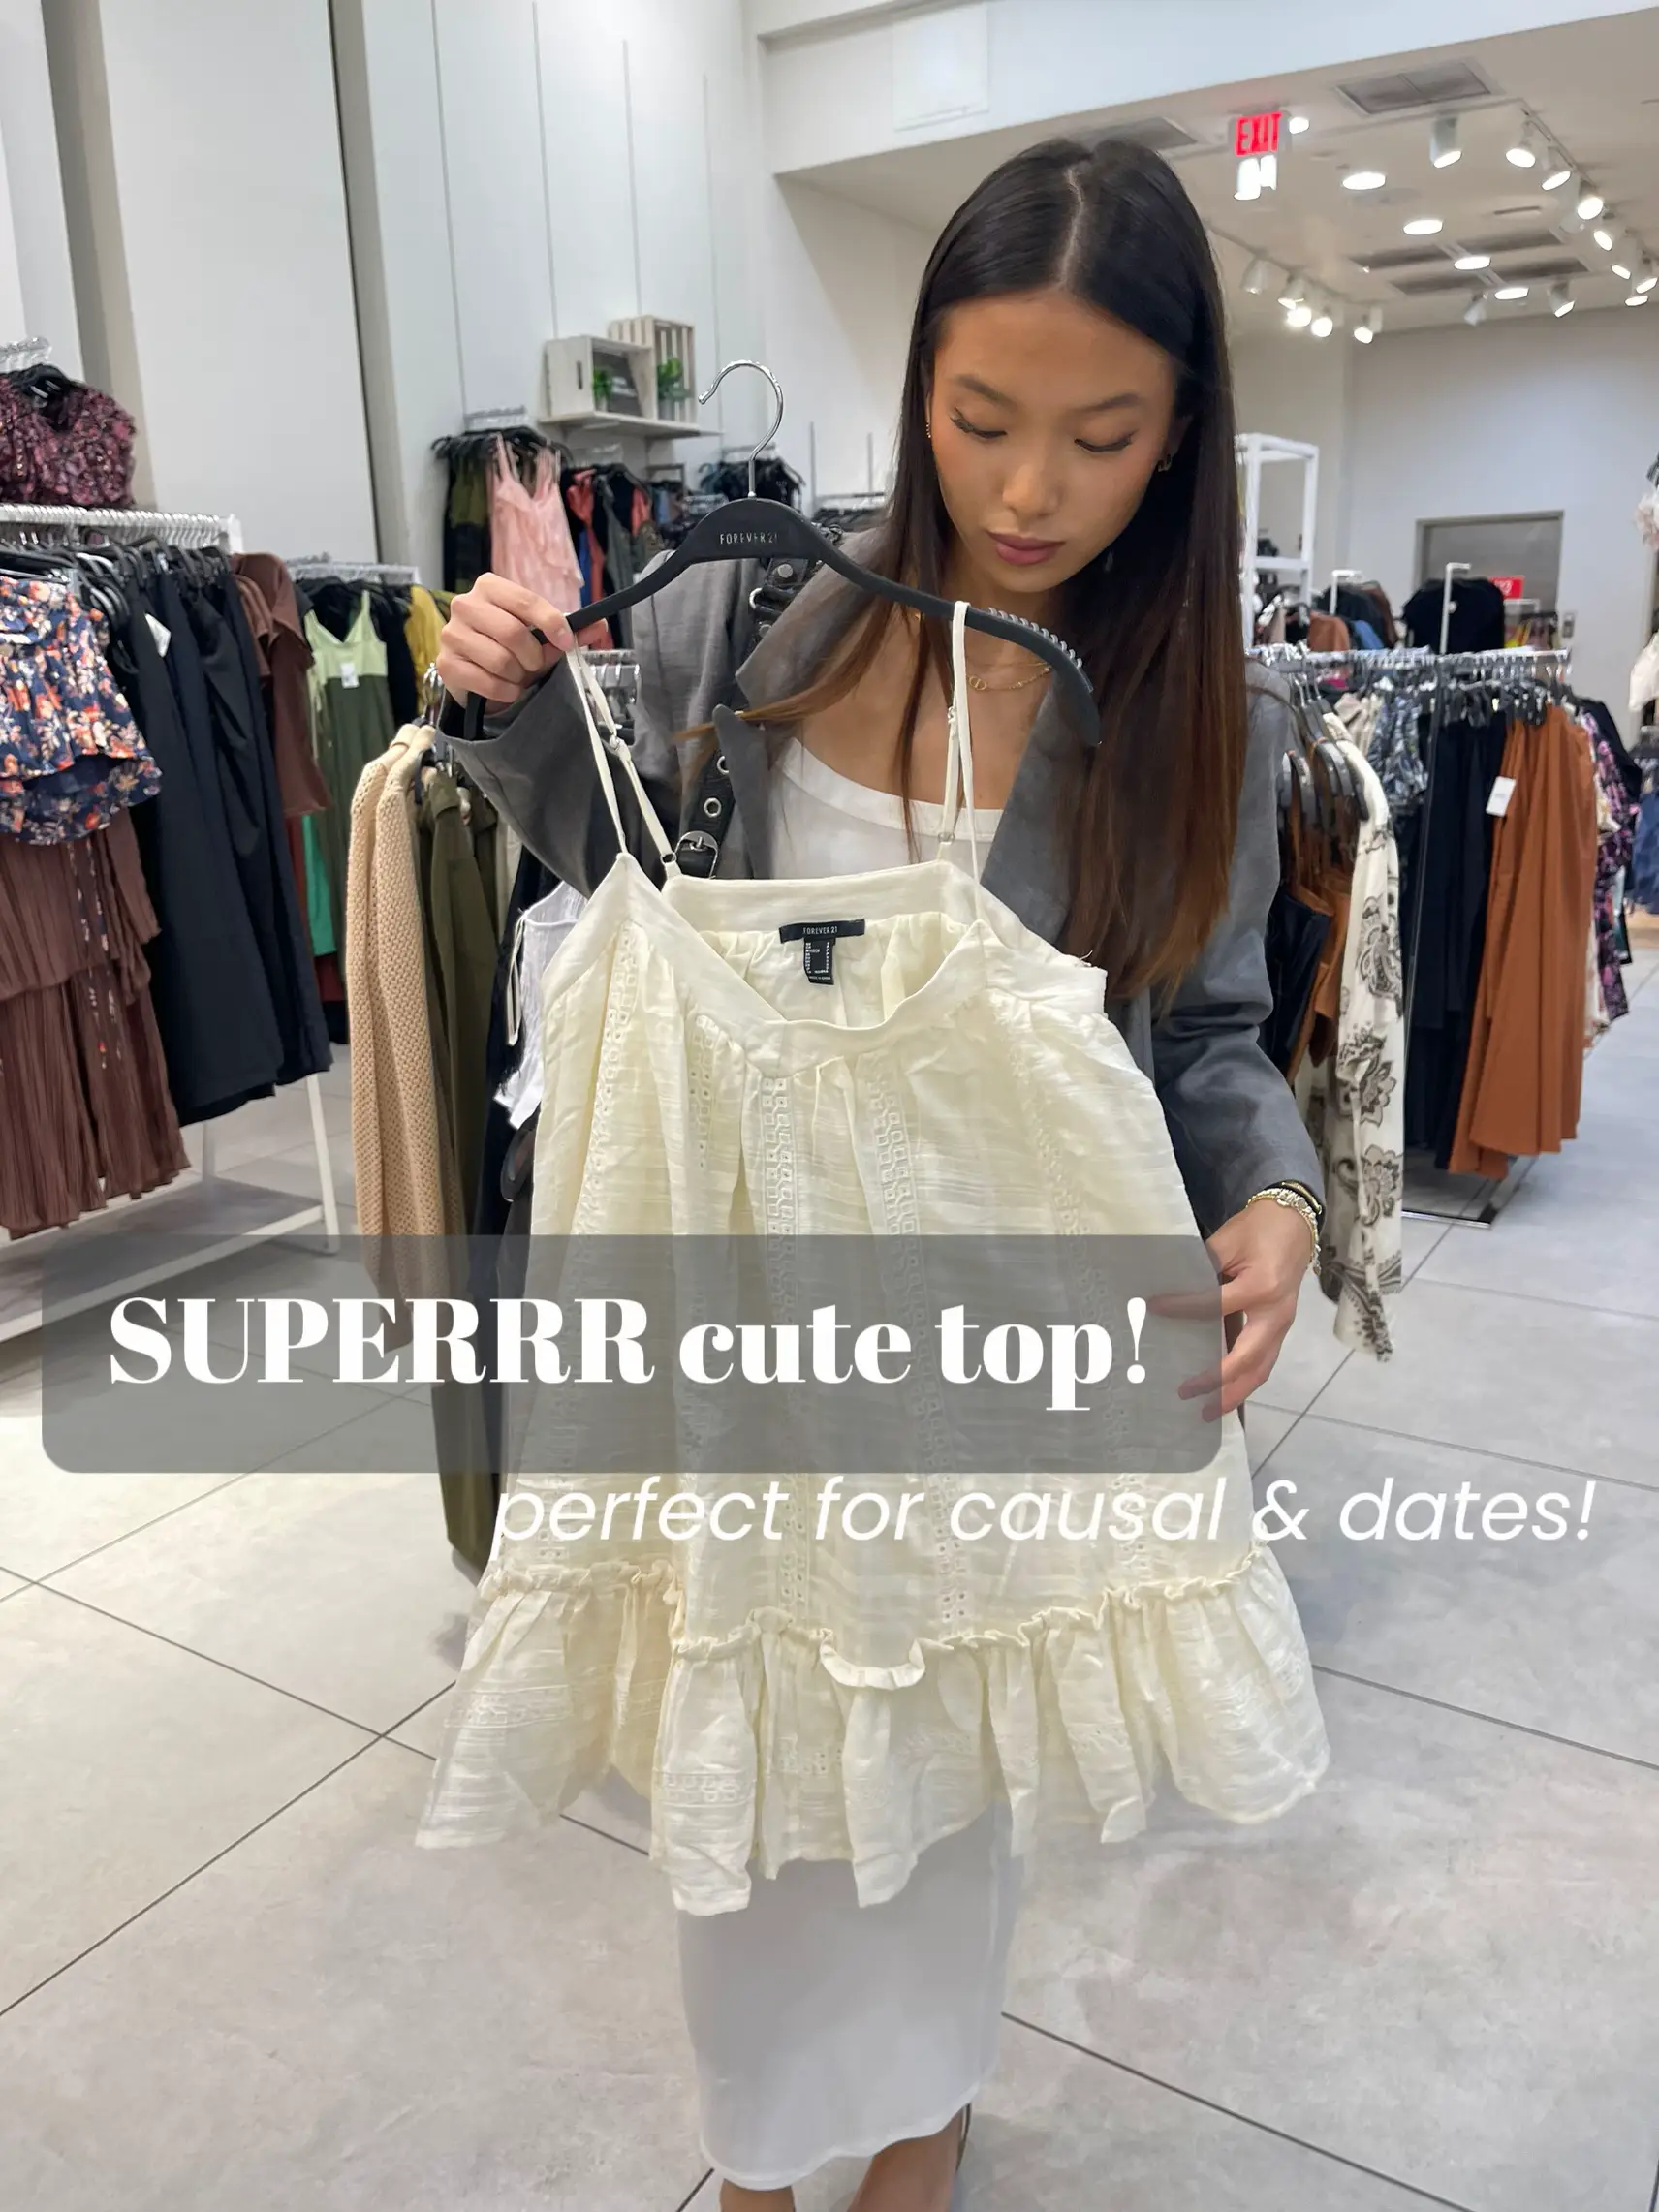 Shop with me @ Forever 21, Gallery posted by Isabelle